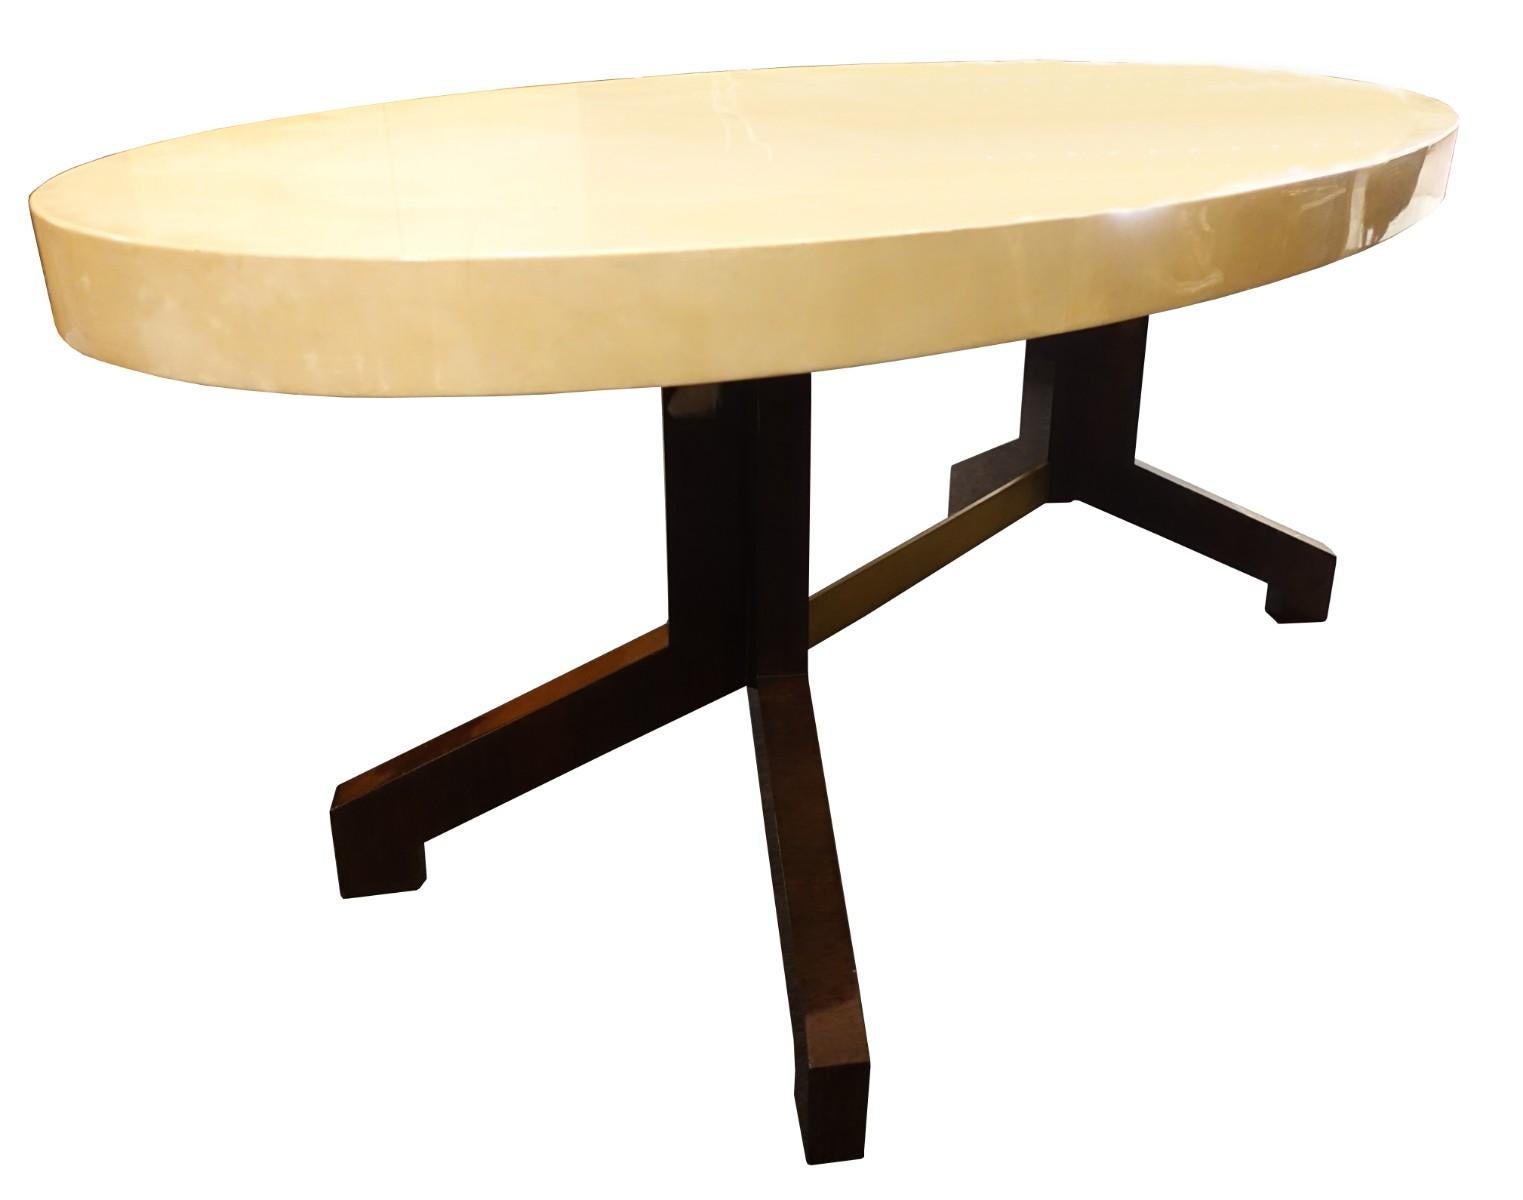 Aldo Tura parchment oval table and eight chairs, 1950-1960

Measures: Width: Table 190 cm, chairs 59 cm
Height: Table 76 cm, chairs 120 cm
Depth: Table 95 cm, chairs 47 cm.